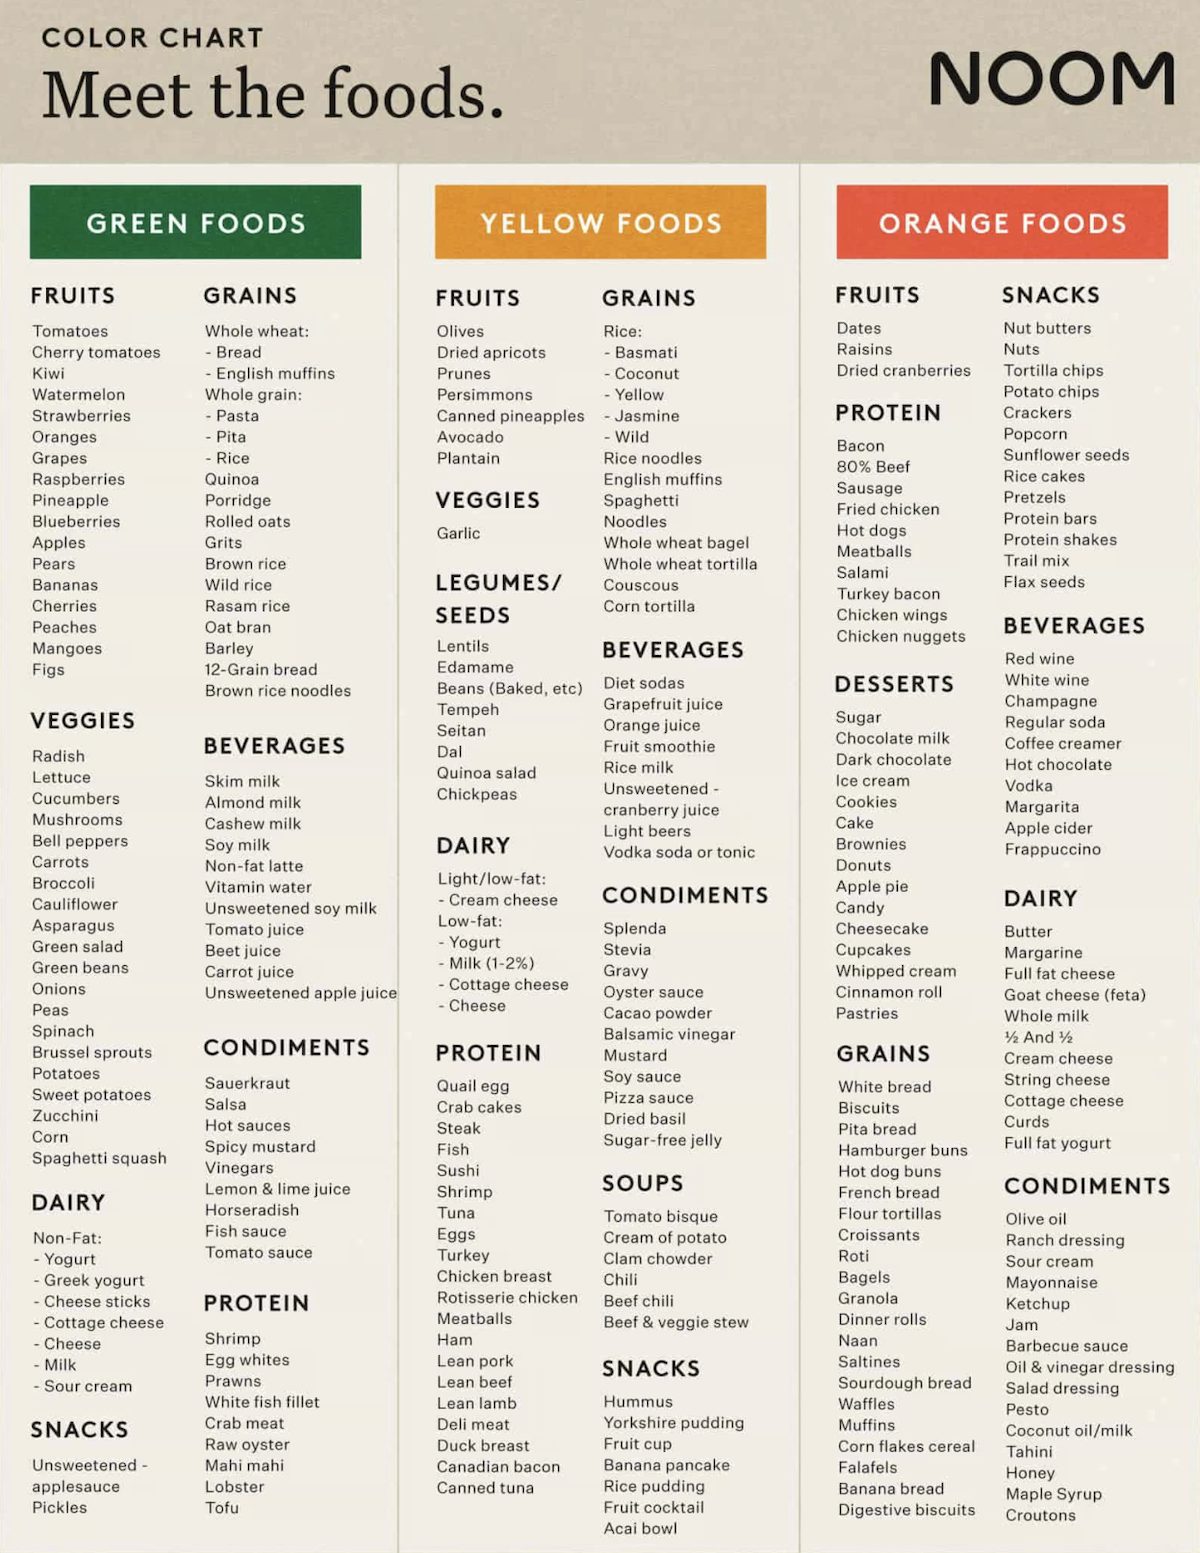 The Noom food color chart